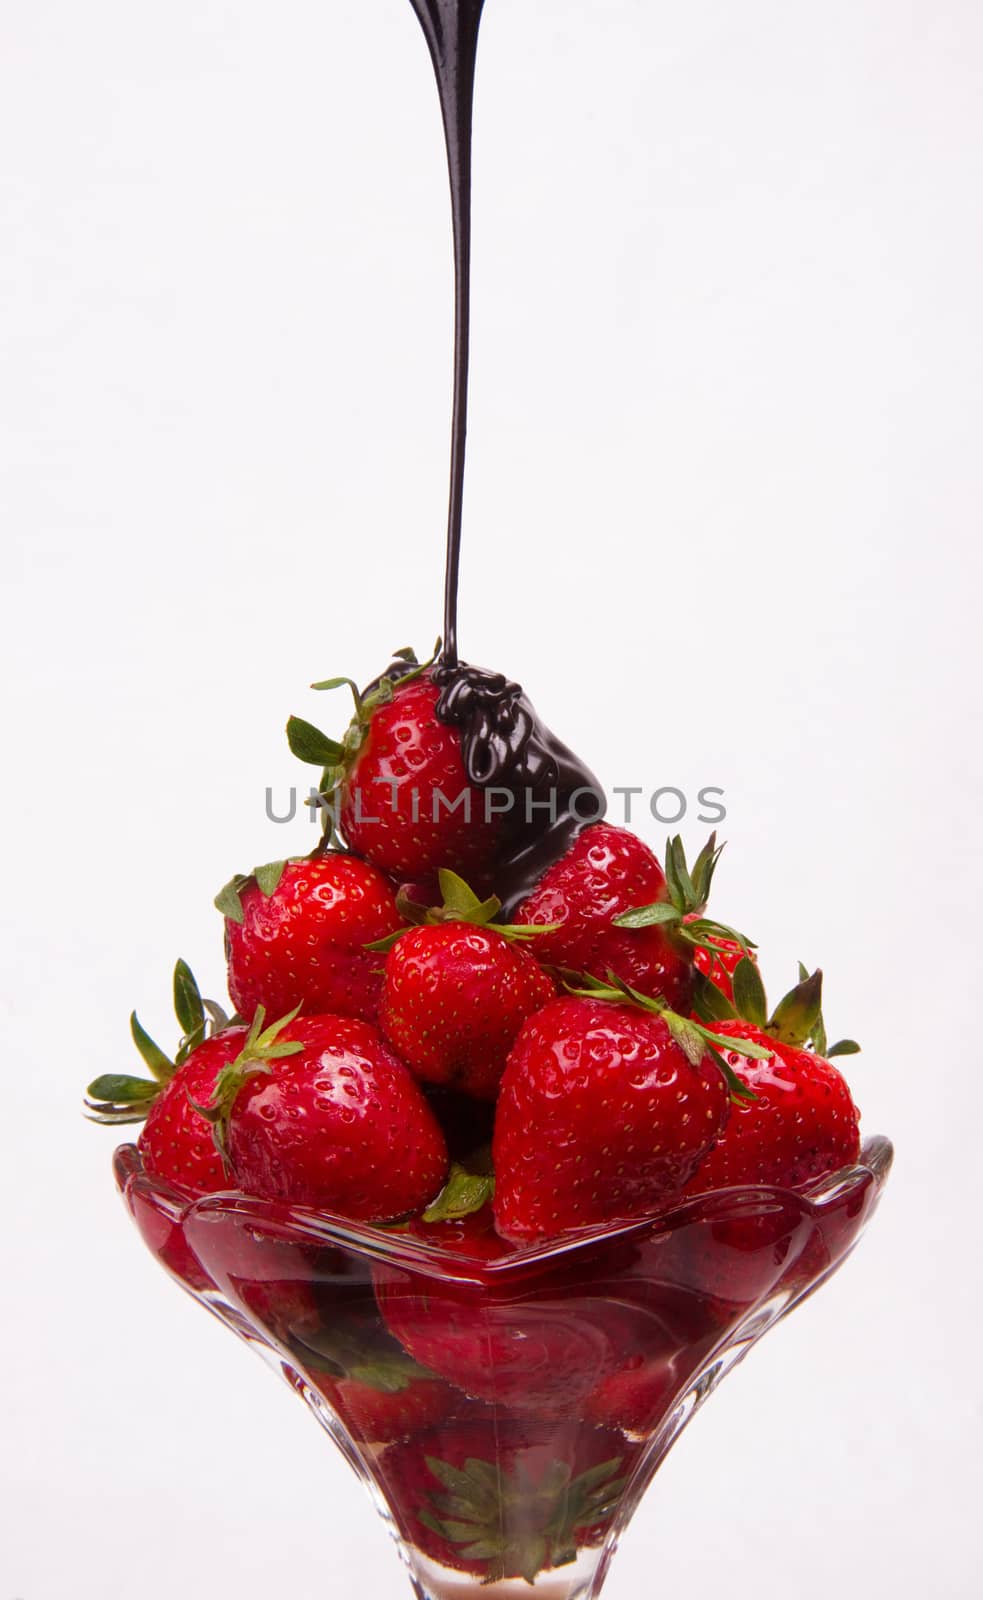 Chocolate sauce hits the berries in a glass parfait container